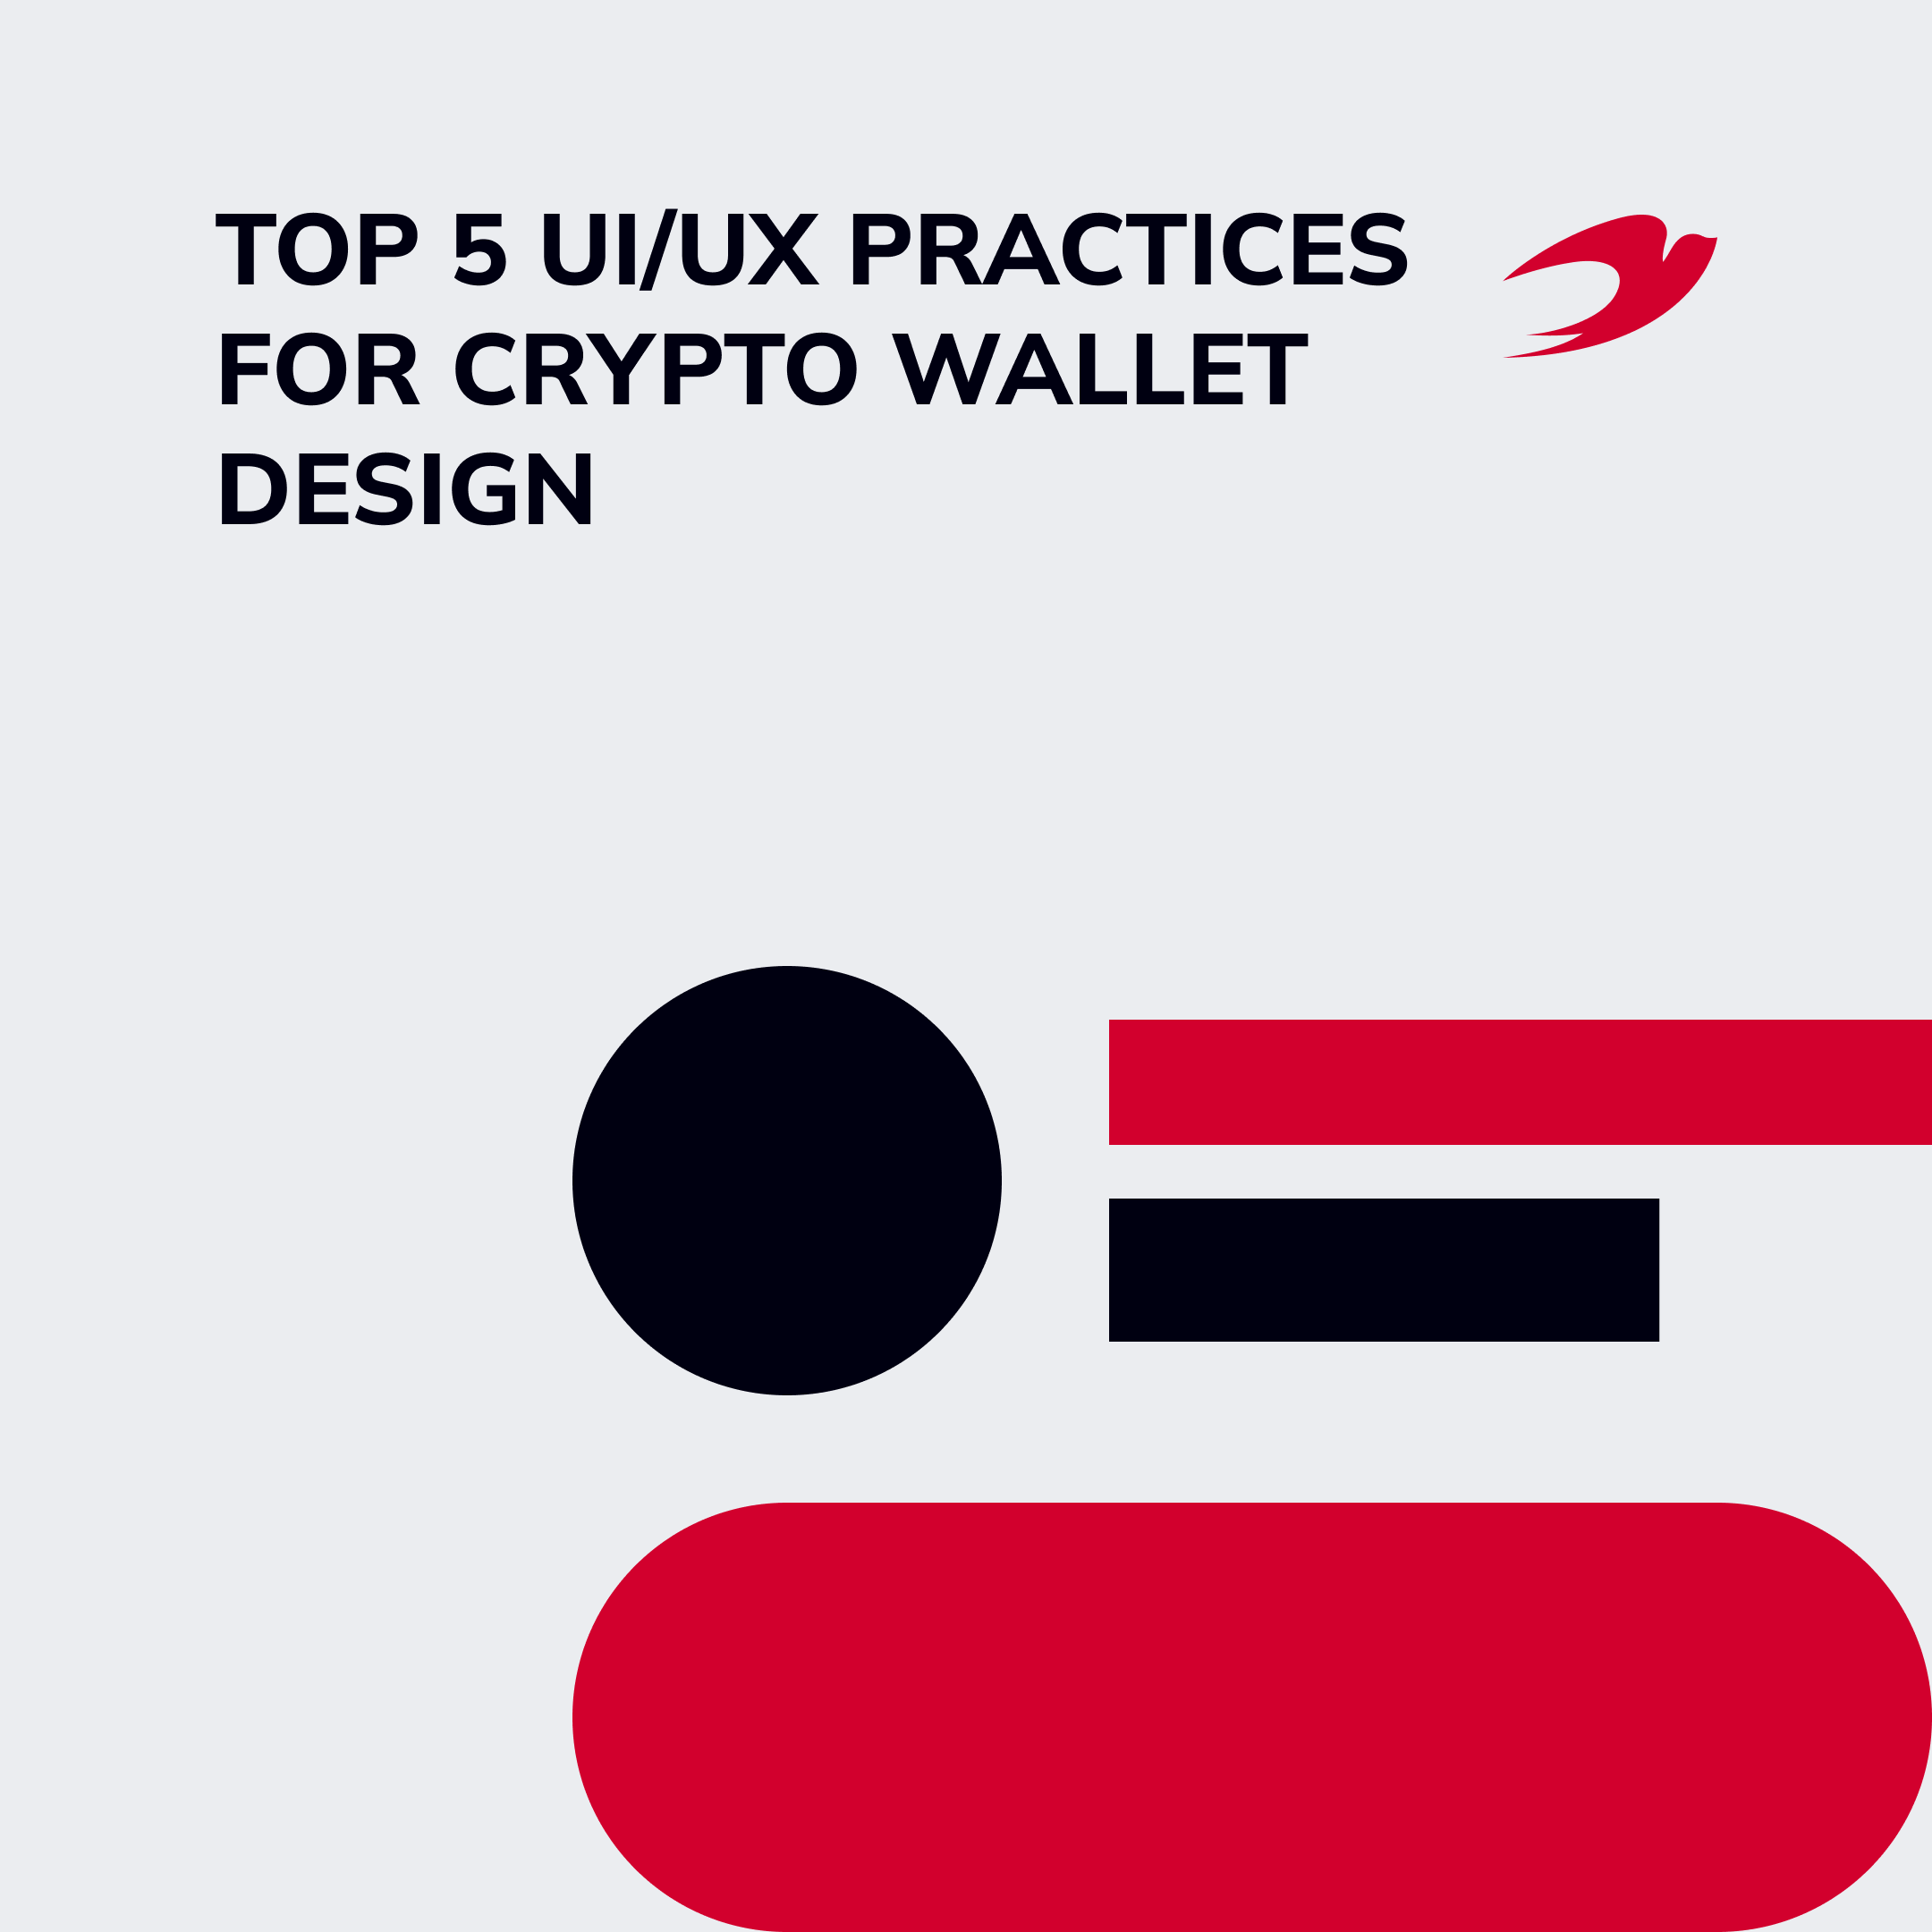 Top 5 UI/UX practices for crypto wallet design